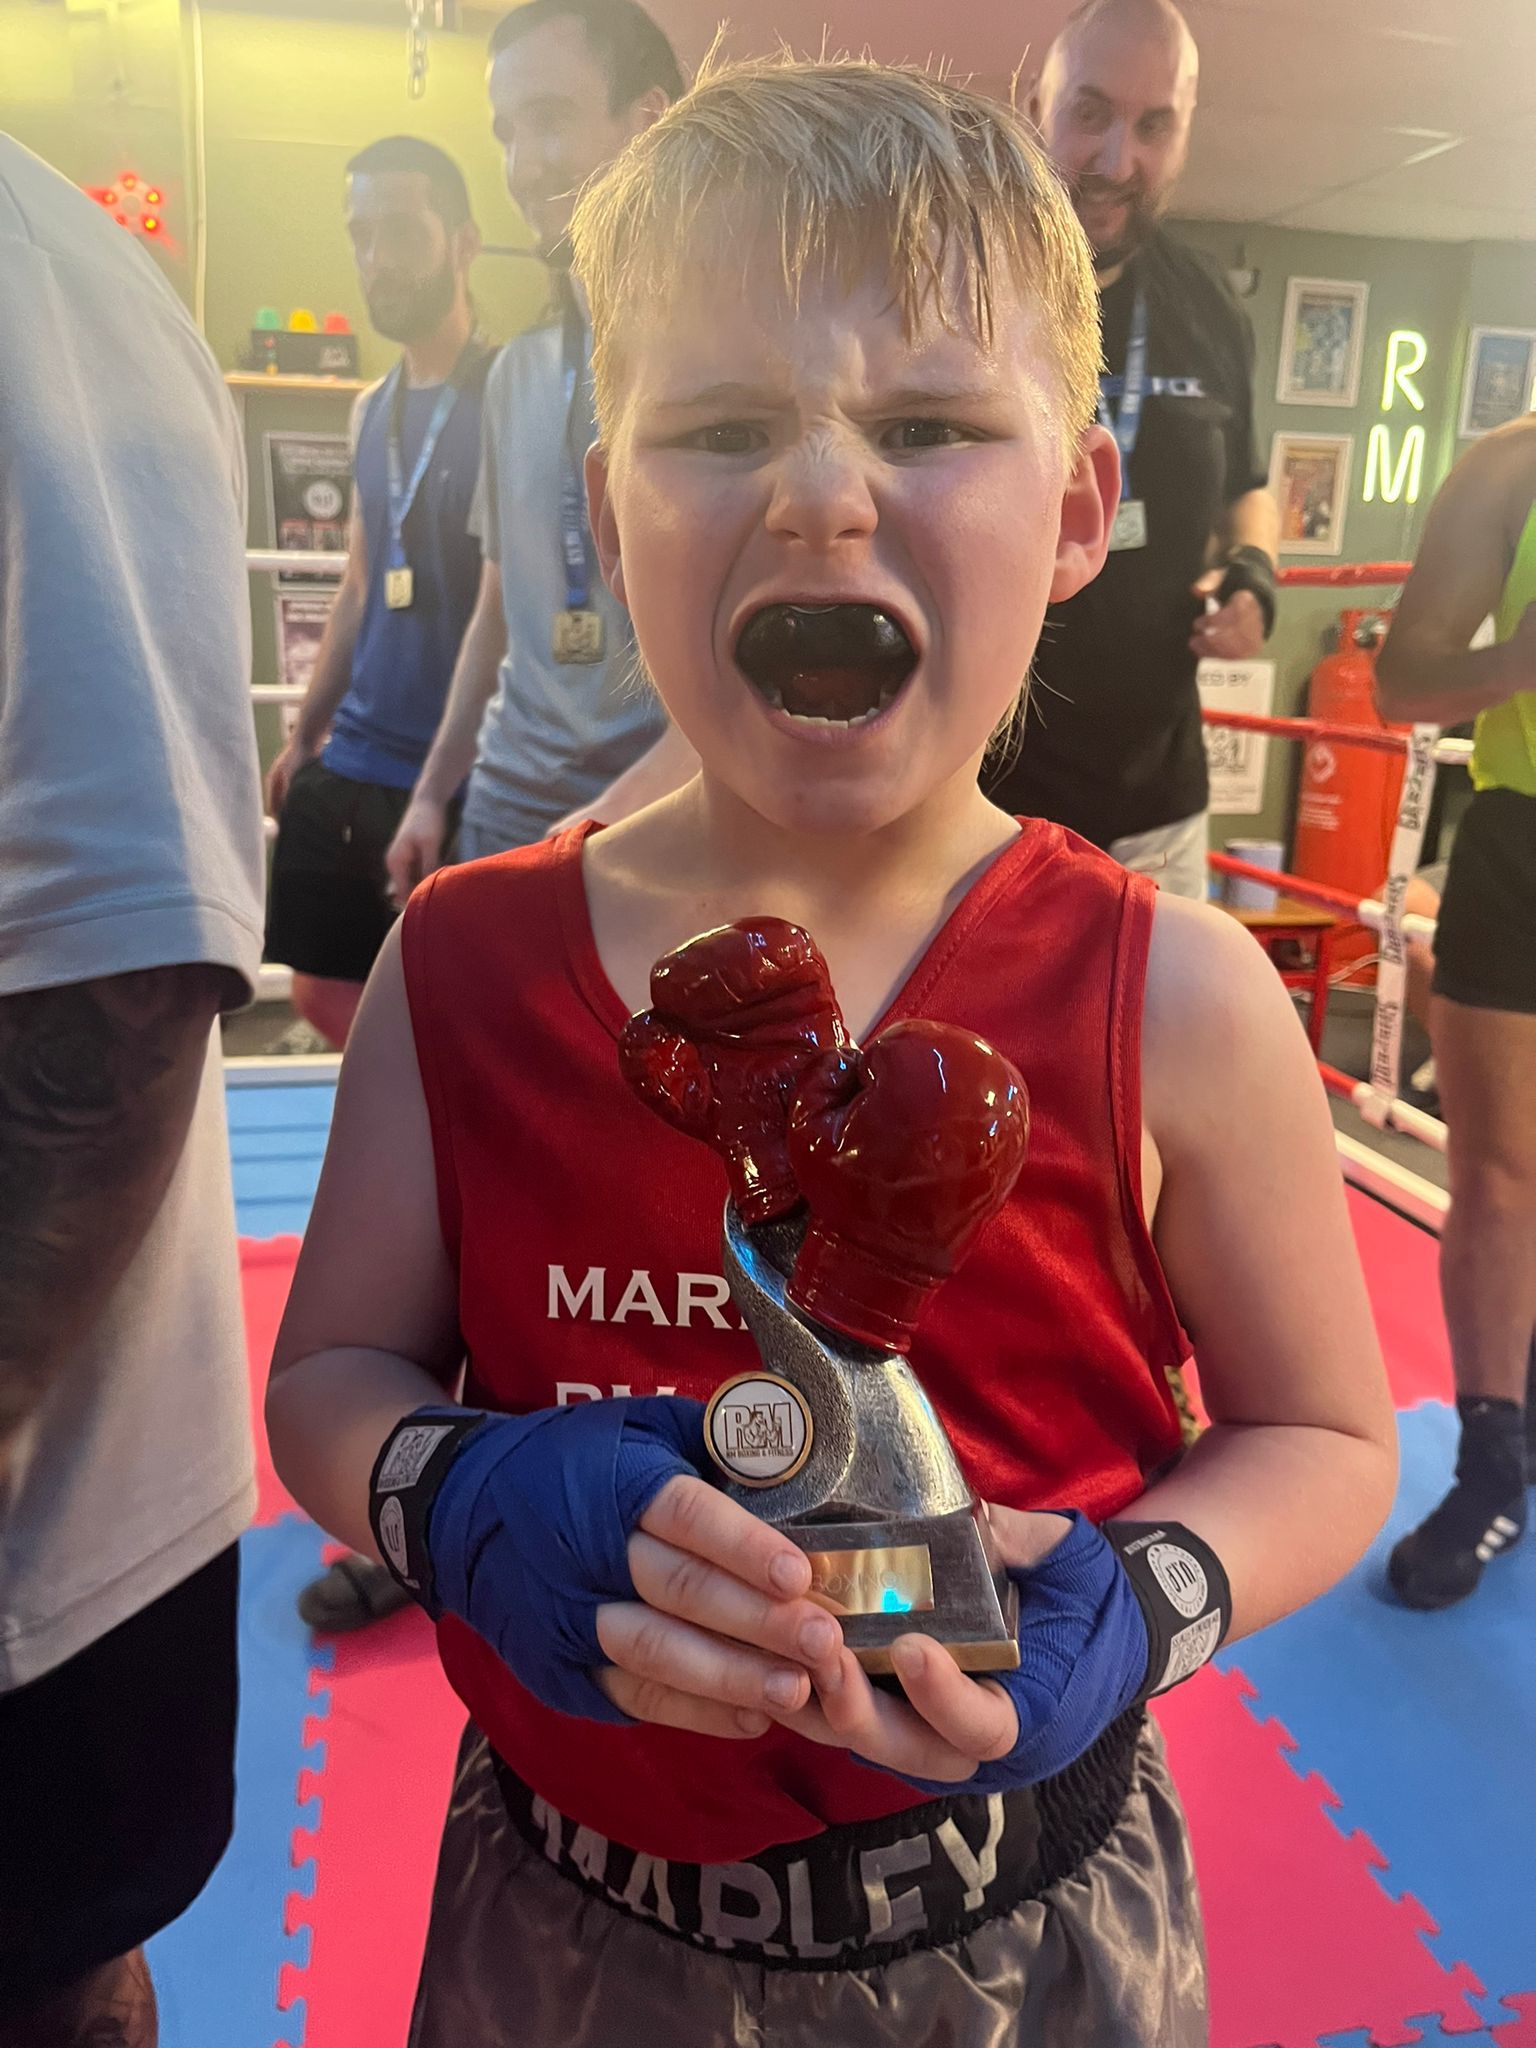 Daniels son Marley after an exhibition bout